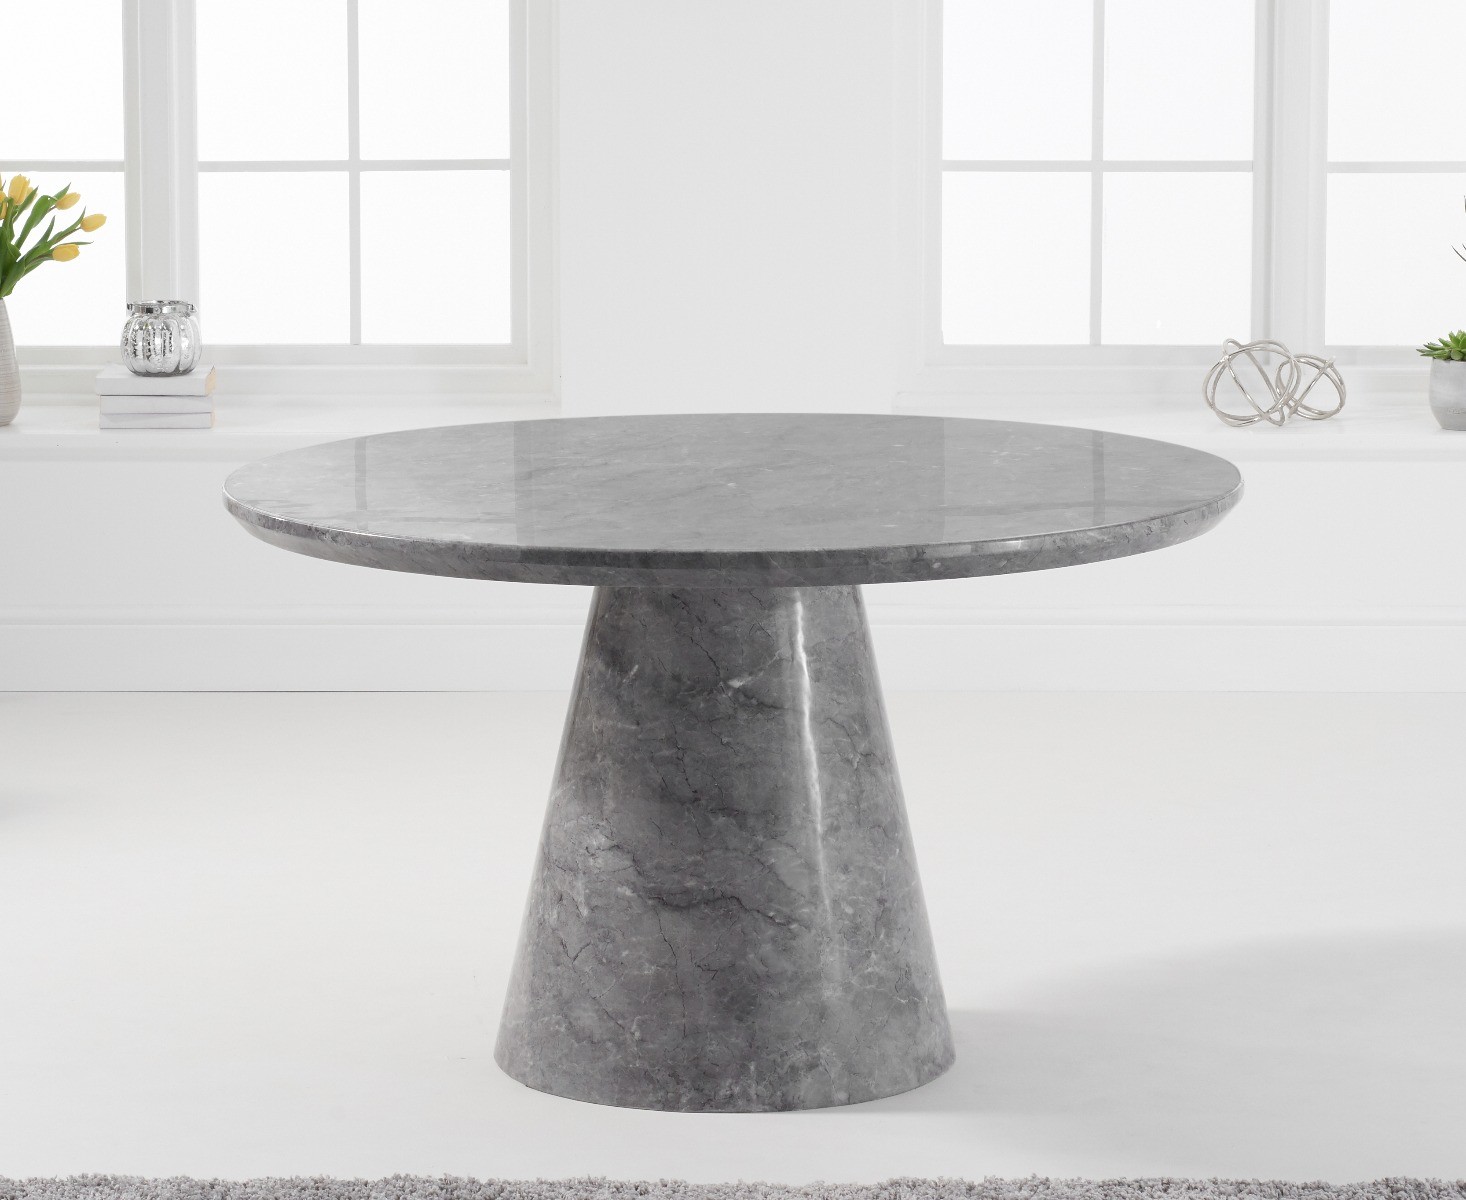 Photo 1 of Ravello 130cm round grey marble dining table with 6 black aldo chairs